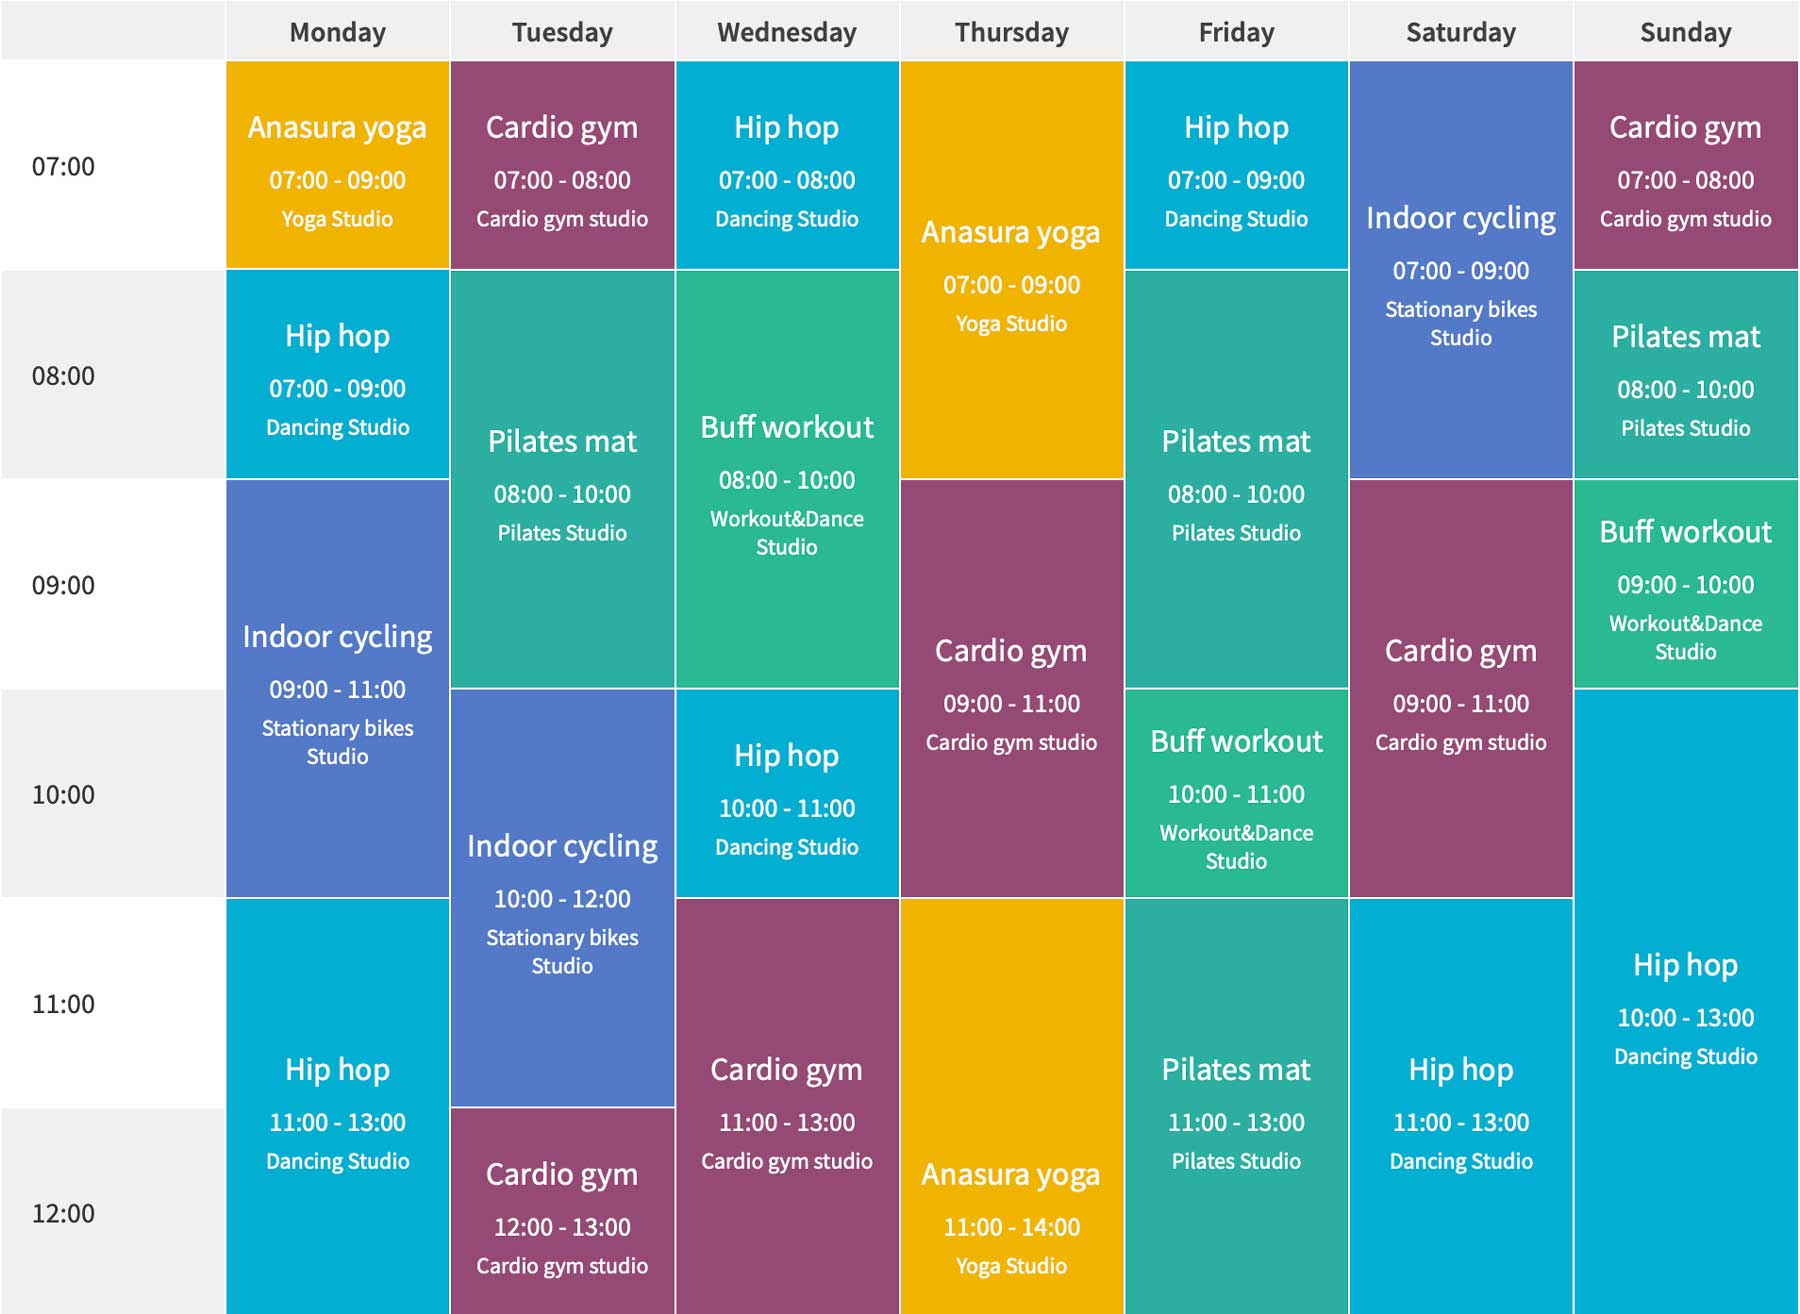 An example of a color-coded calendar